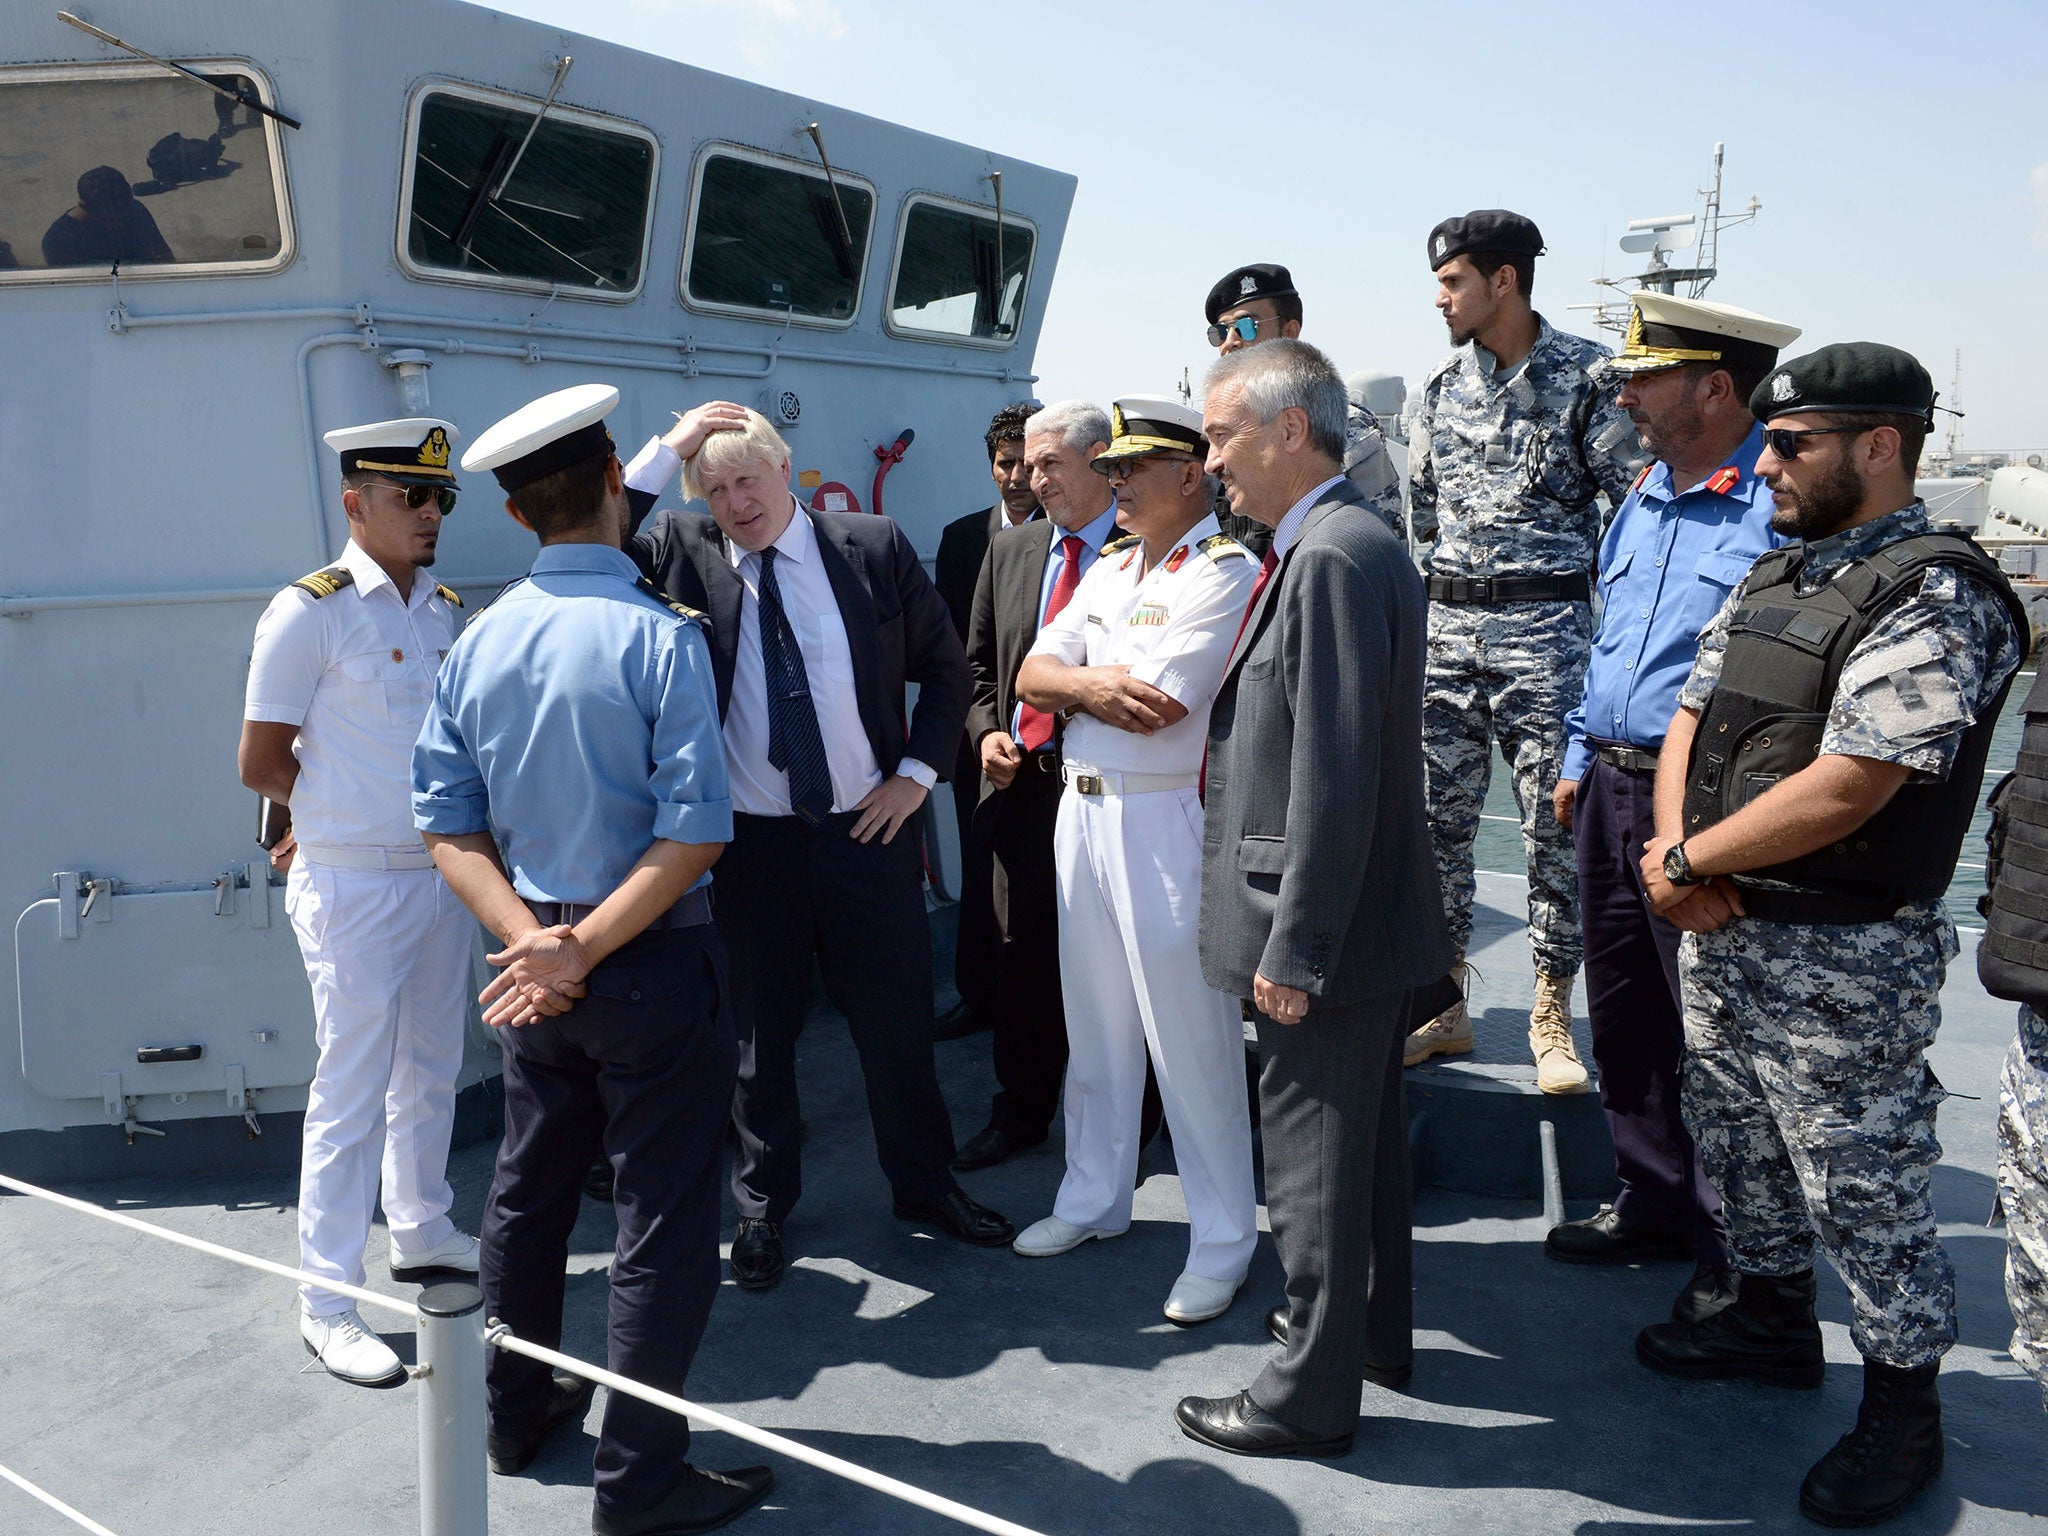 Boris Johnson met members of the Libyan coastguard, who were trained by the Royal Navy, at a Libyan naval base in Tripoli in August